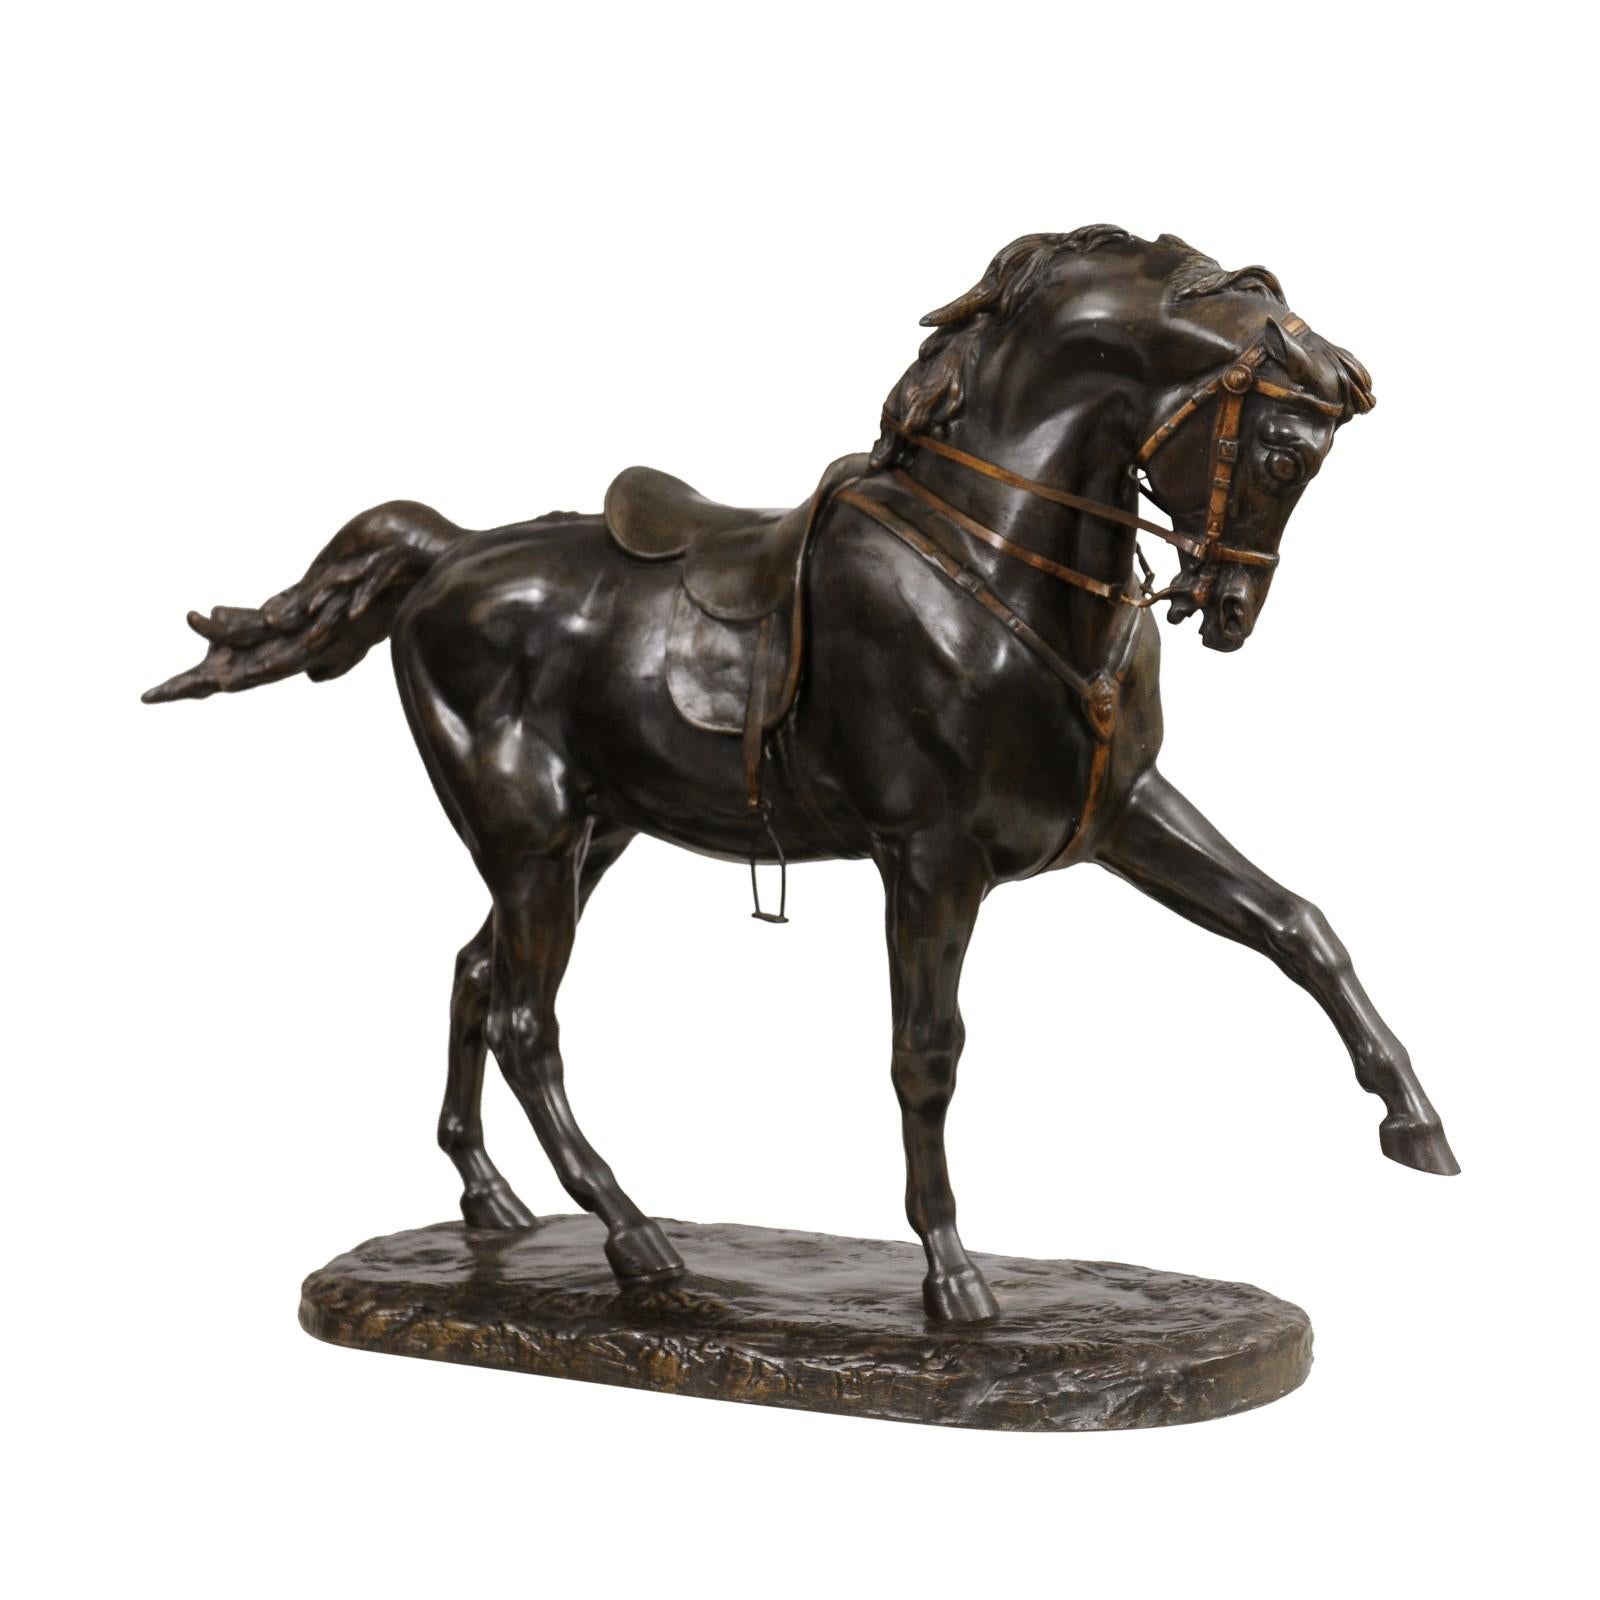 A French bronze sculpture from the 19th century, depicting a horse with left leg raised, on oval base. Created in France during the 19th century, this bronze statuette features an elegant horse depicted in an energetic position, his front left leg